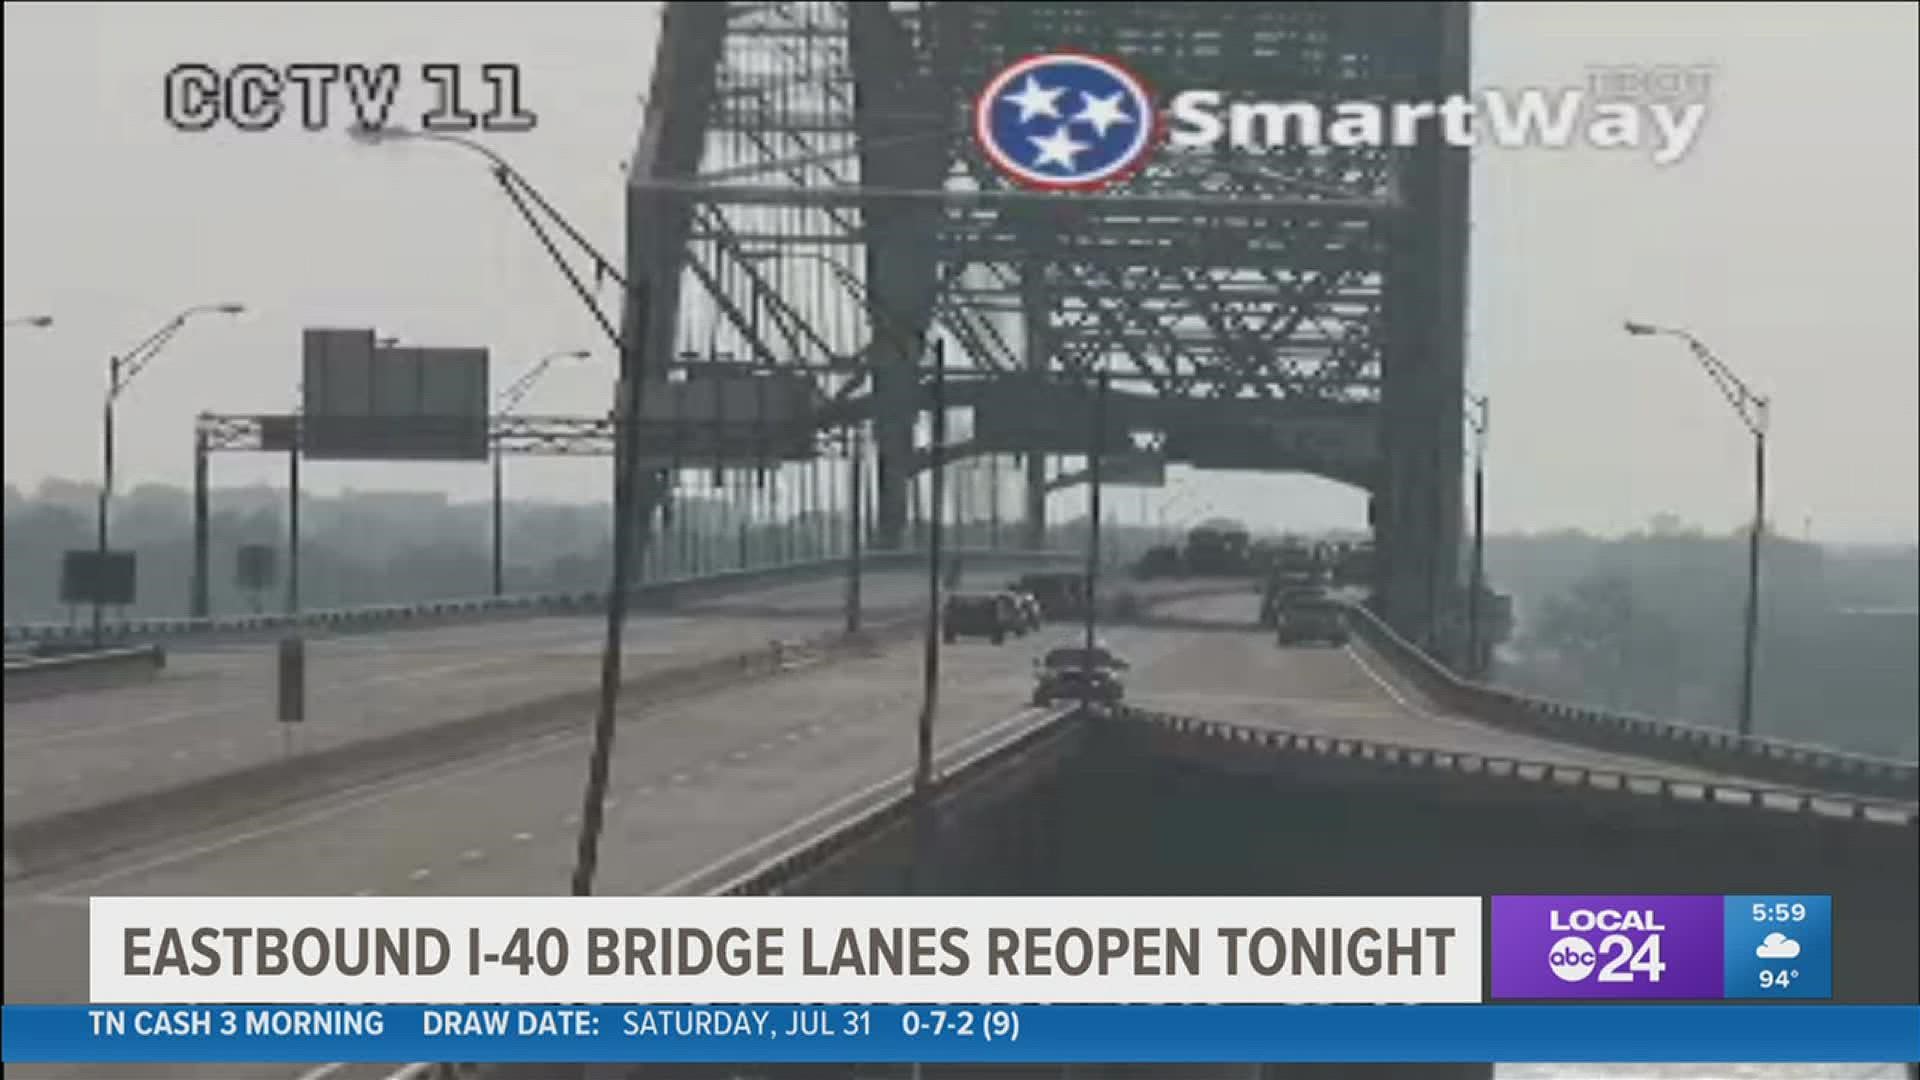 The final work is being done to reopen eastbound lanes over the Hernando de Soto bridge in Memphis to limited traffic by 10:00 p.m. Saturday.